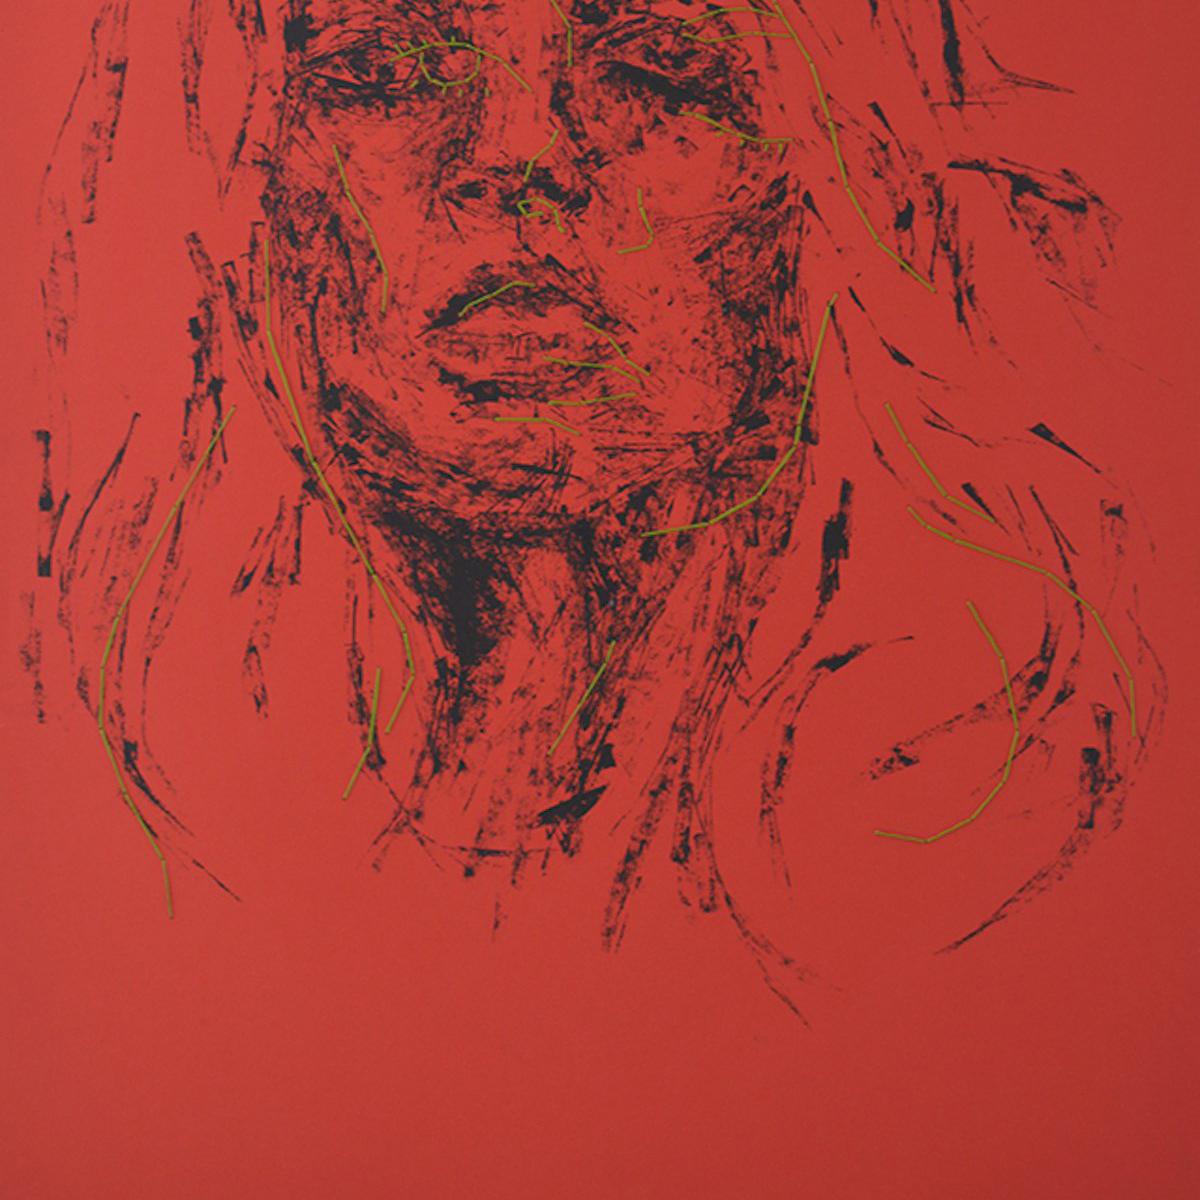 Artist continuesthe exploration of kate Moss.
Water based ink and cotton sewn on paper